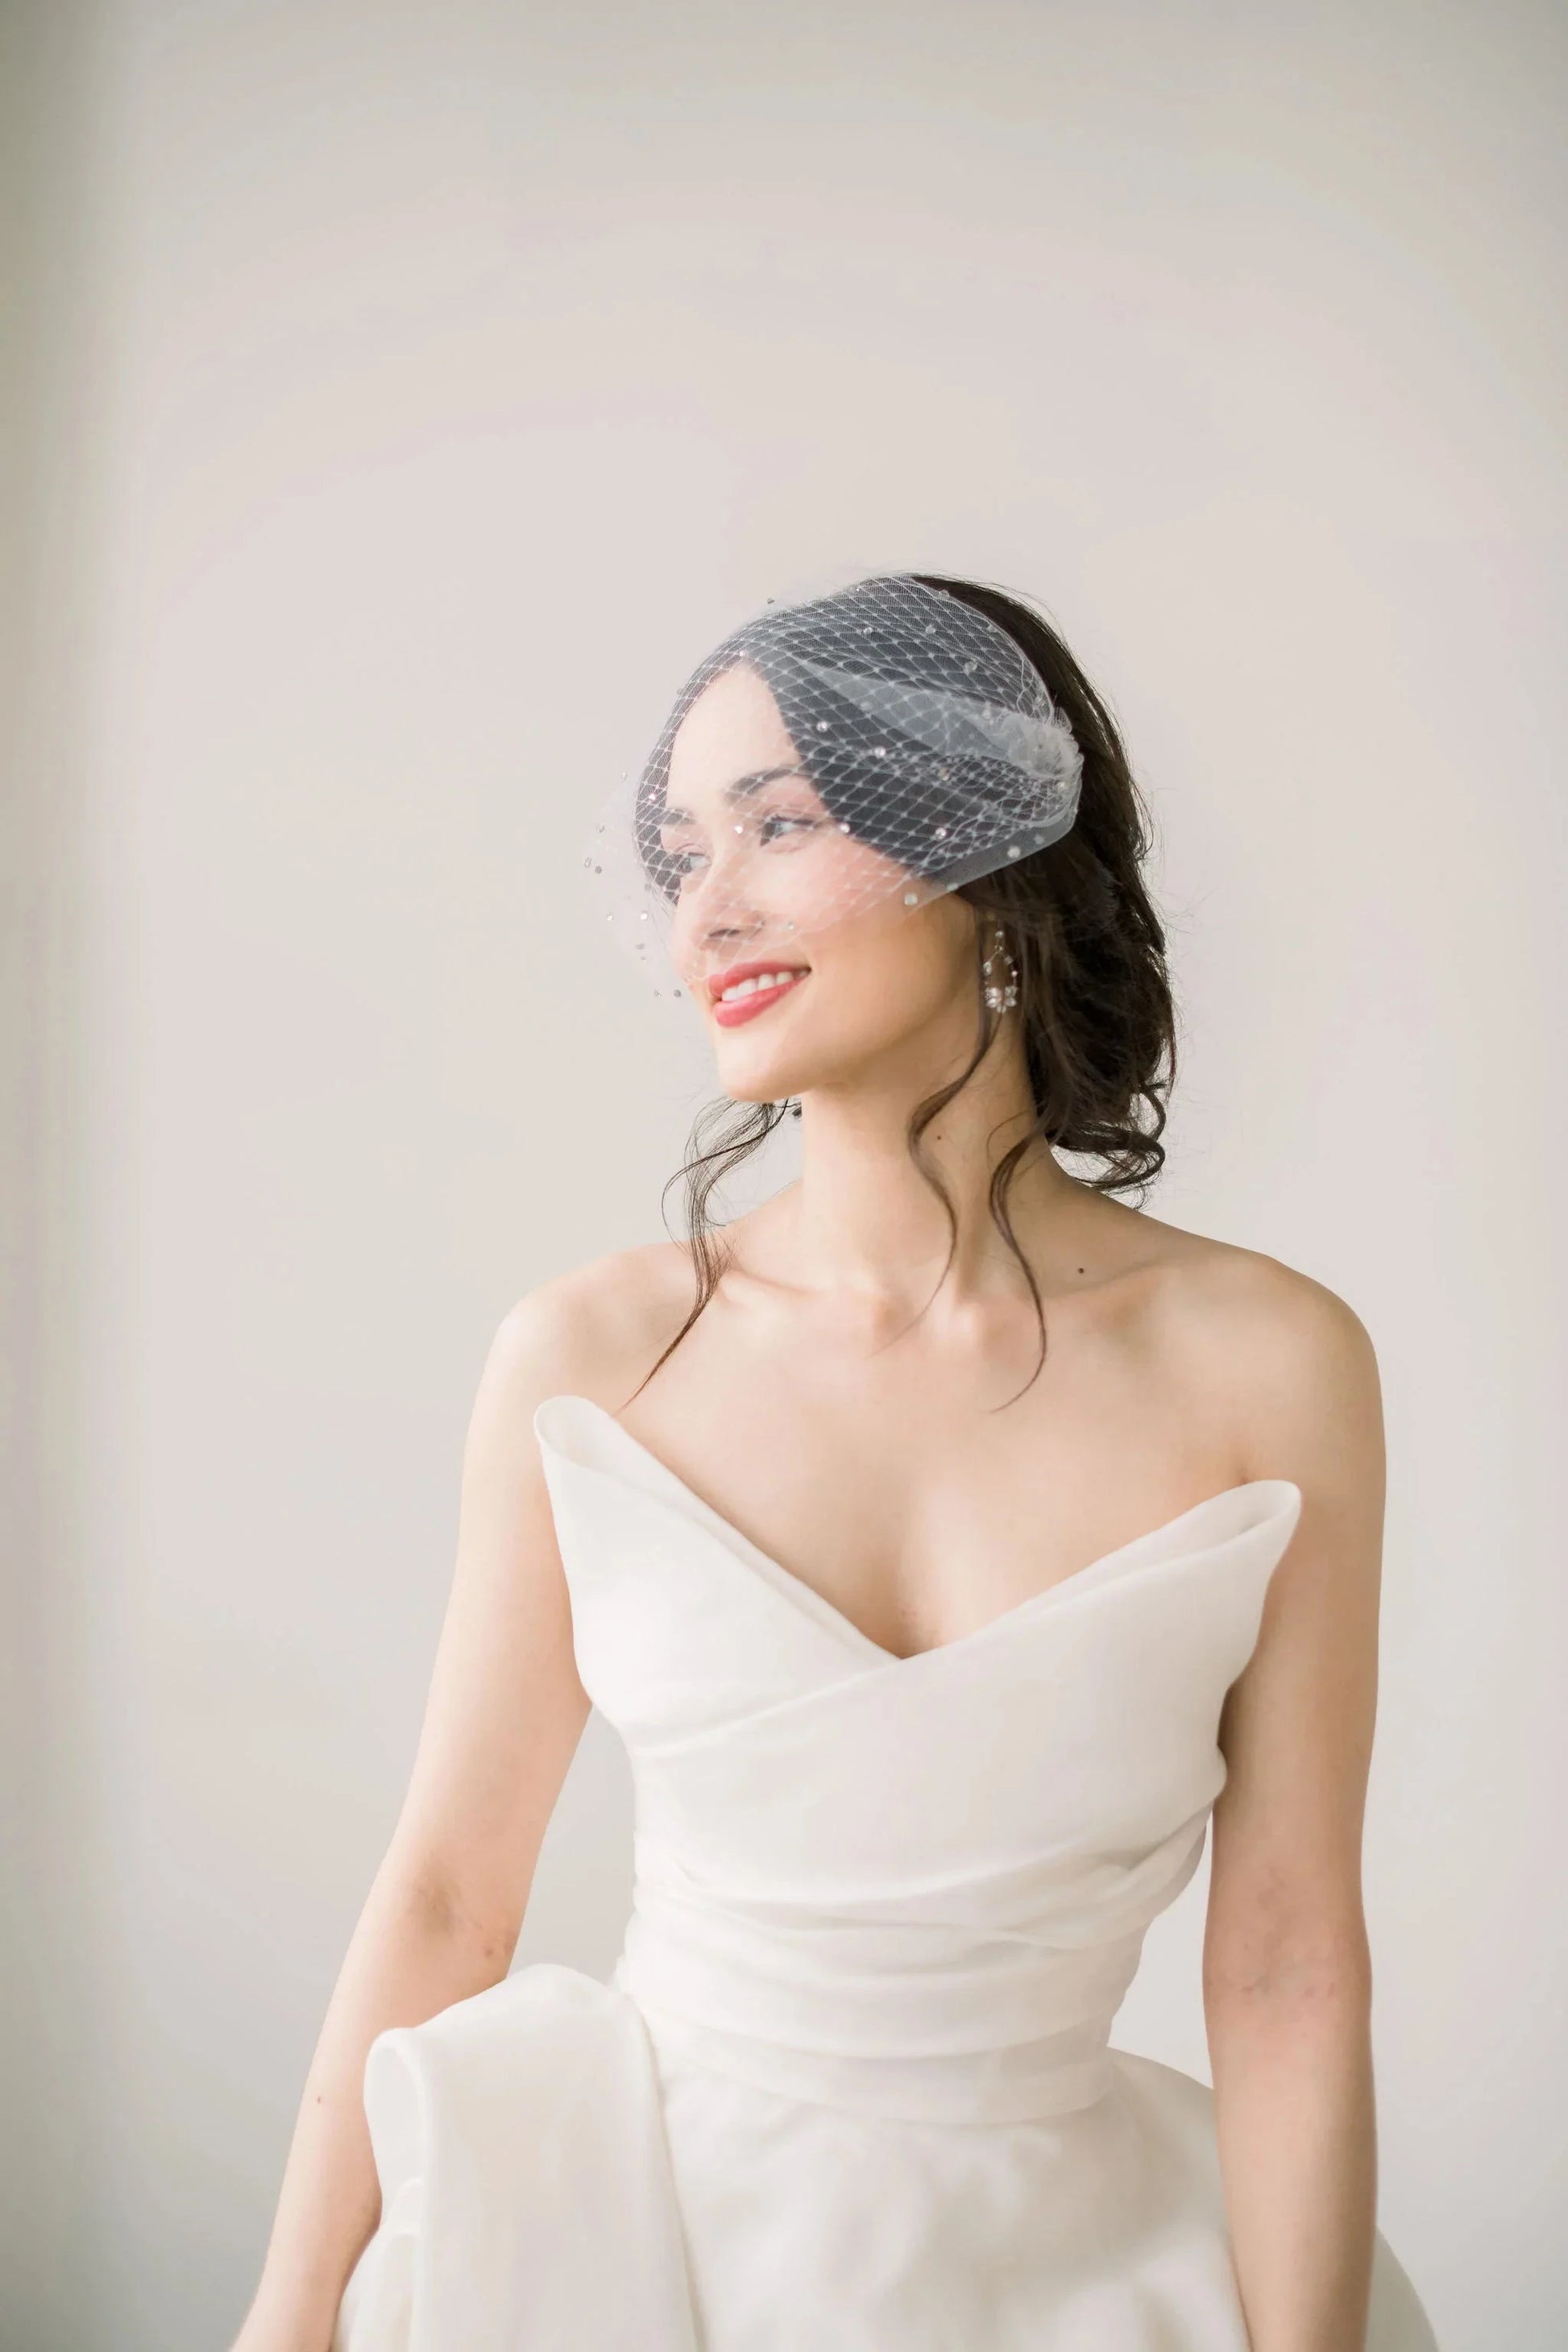 Double layer bandeau birdcage veil with crystals- ready to ship Tessa Kim